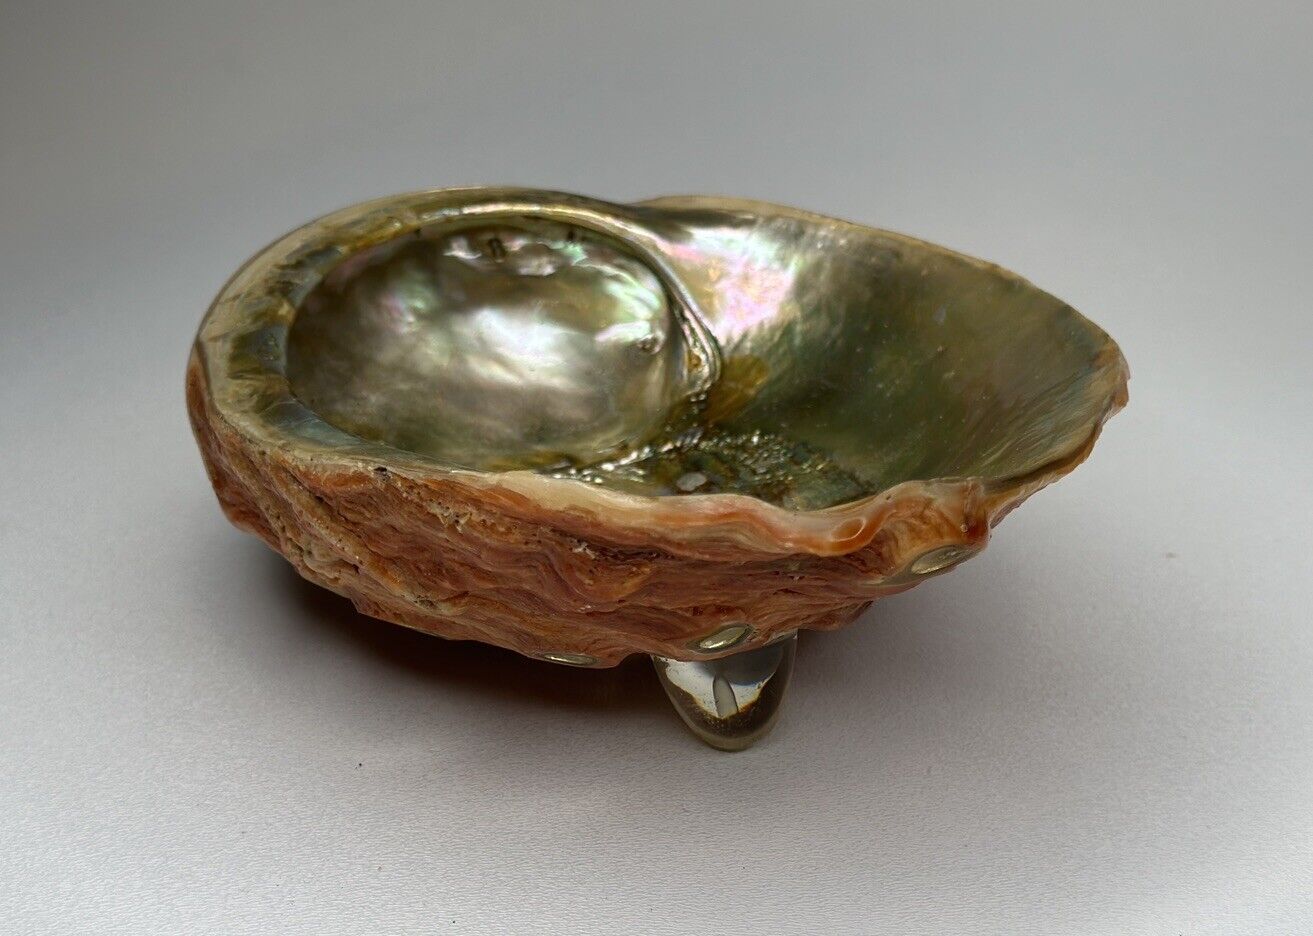 Massive Prismatic Rainbow-Colored Red Abalone Shell Dish 8” x 6”